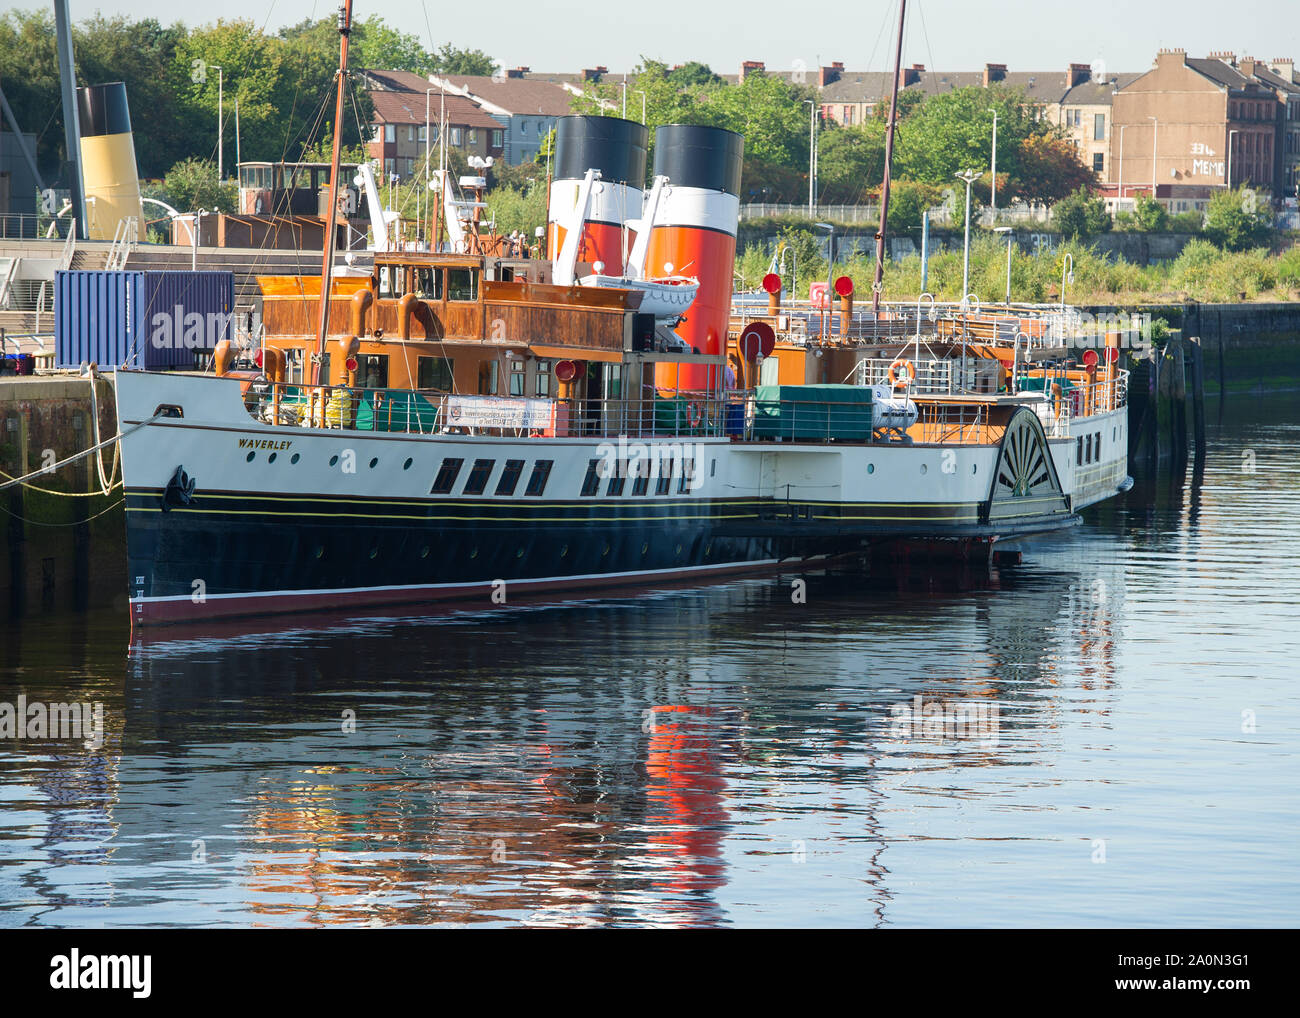 Glasgow, UK. 21 September 2019.  The last sea-going paddle steamer in the world will receive £1 million of Scottish Government funding to help it sail again, Culture Secretary Fiona Hyslop has announced.  The Waverley Paddle Steamer has been in operation for over 70 years, transporting millions of passengers to a variety of locations throughout the UK but is currently out-of-service and urgently requires new boilers.  Credit: Colin Fisher/Alamy Live News Stock Photo